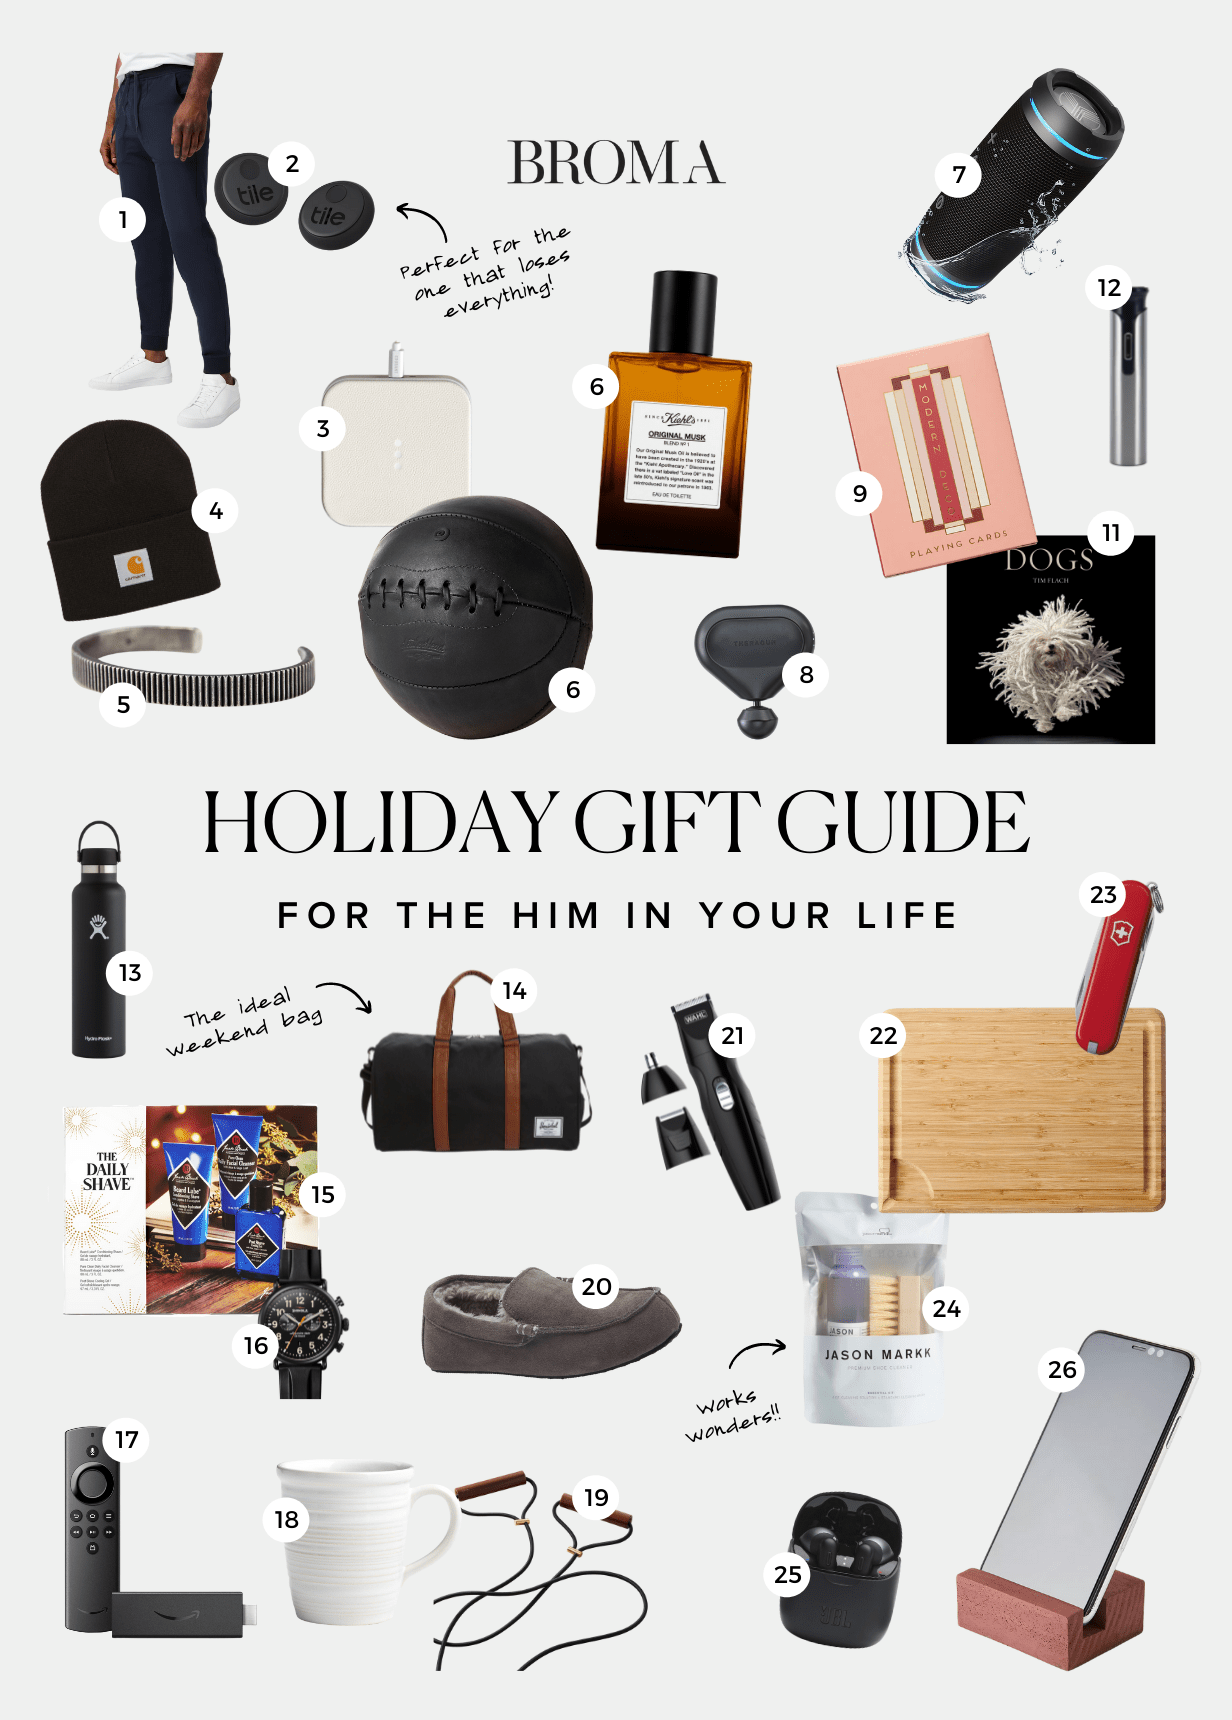 https://bromabakery.com/wp-content/uploads/2021/11/HOLIDAY-GIFT-GUIDE-1.webp